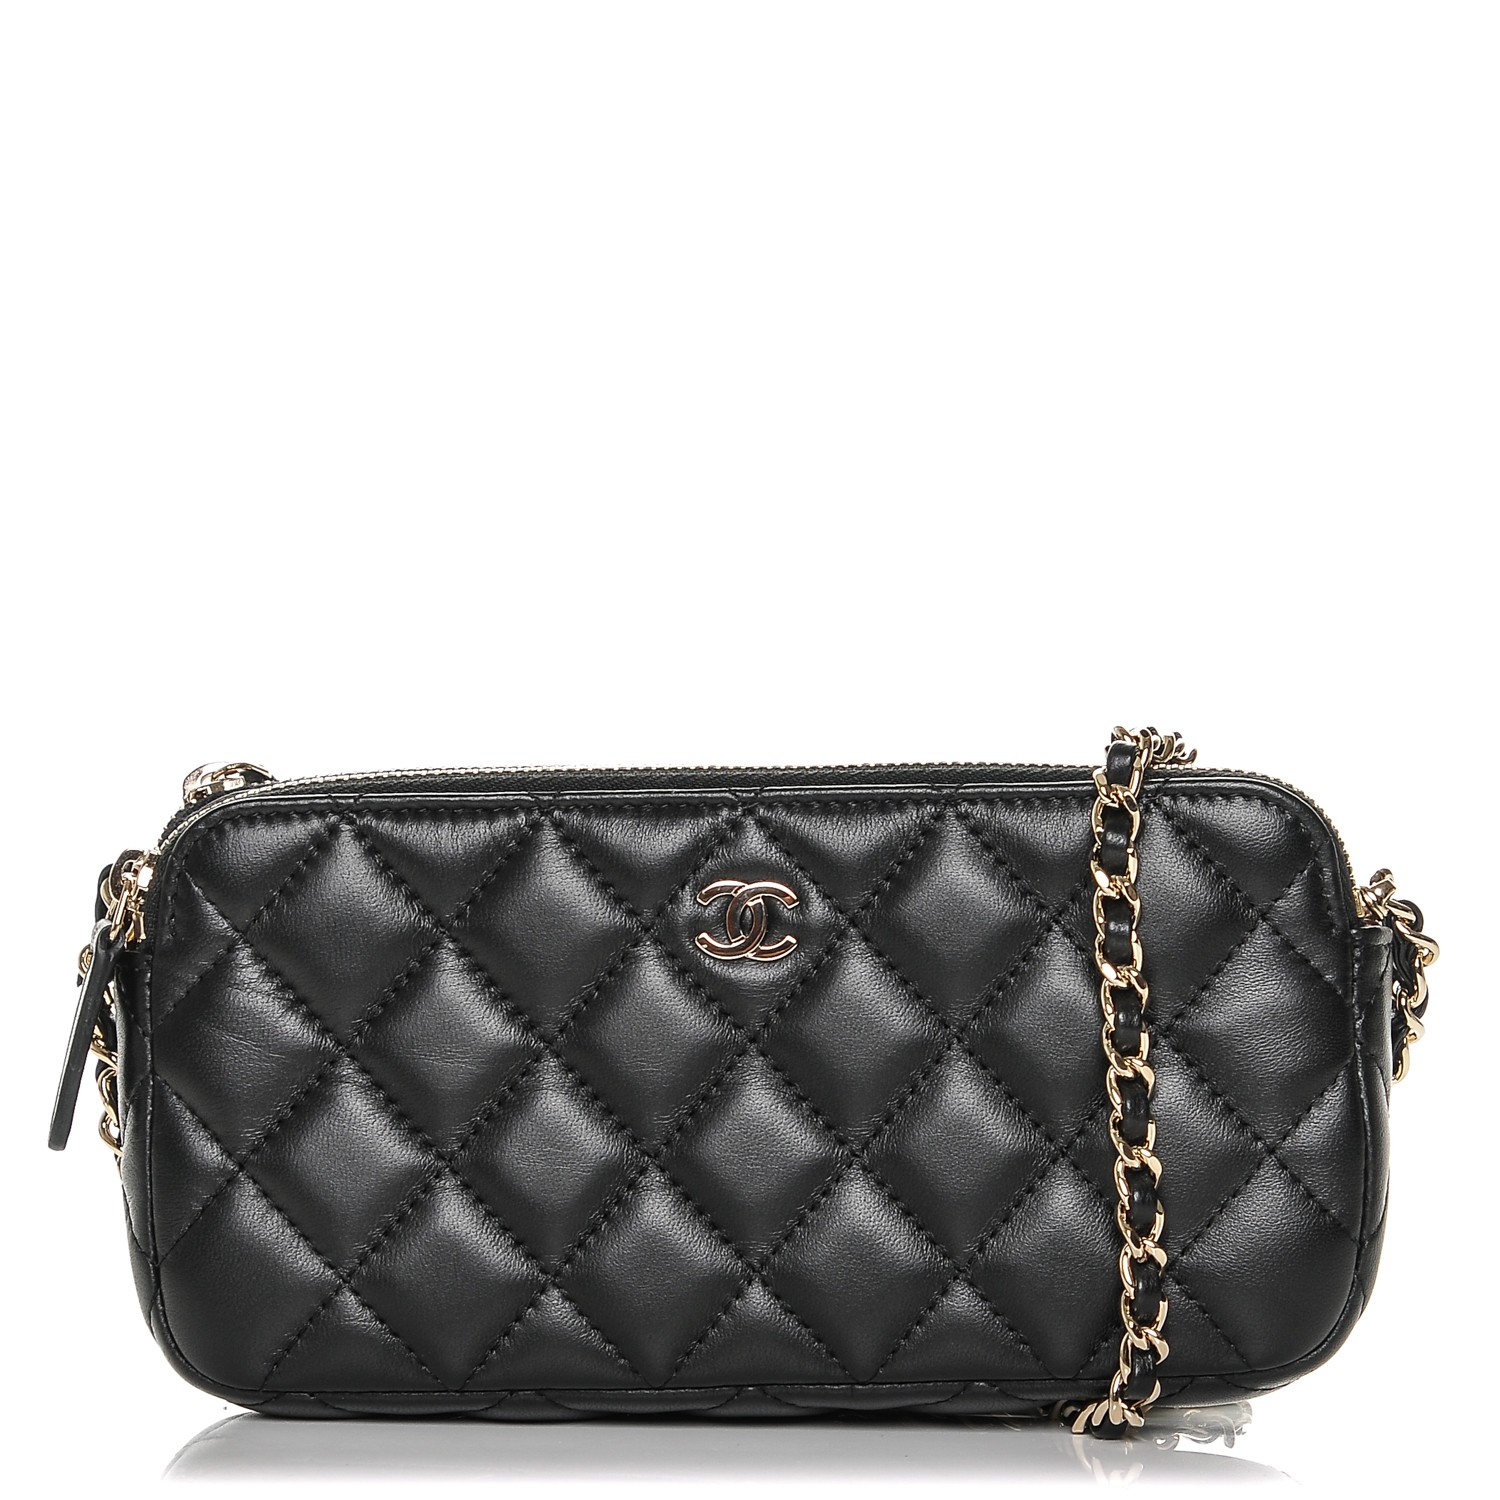 CHANEL Lambskin Quilted Small Clutch With Chain Black 187377 | FASHIONPHILE